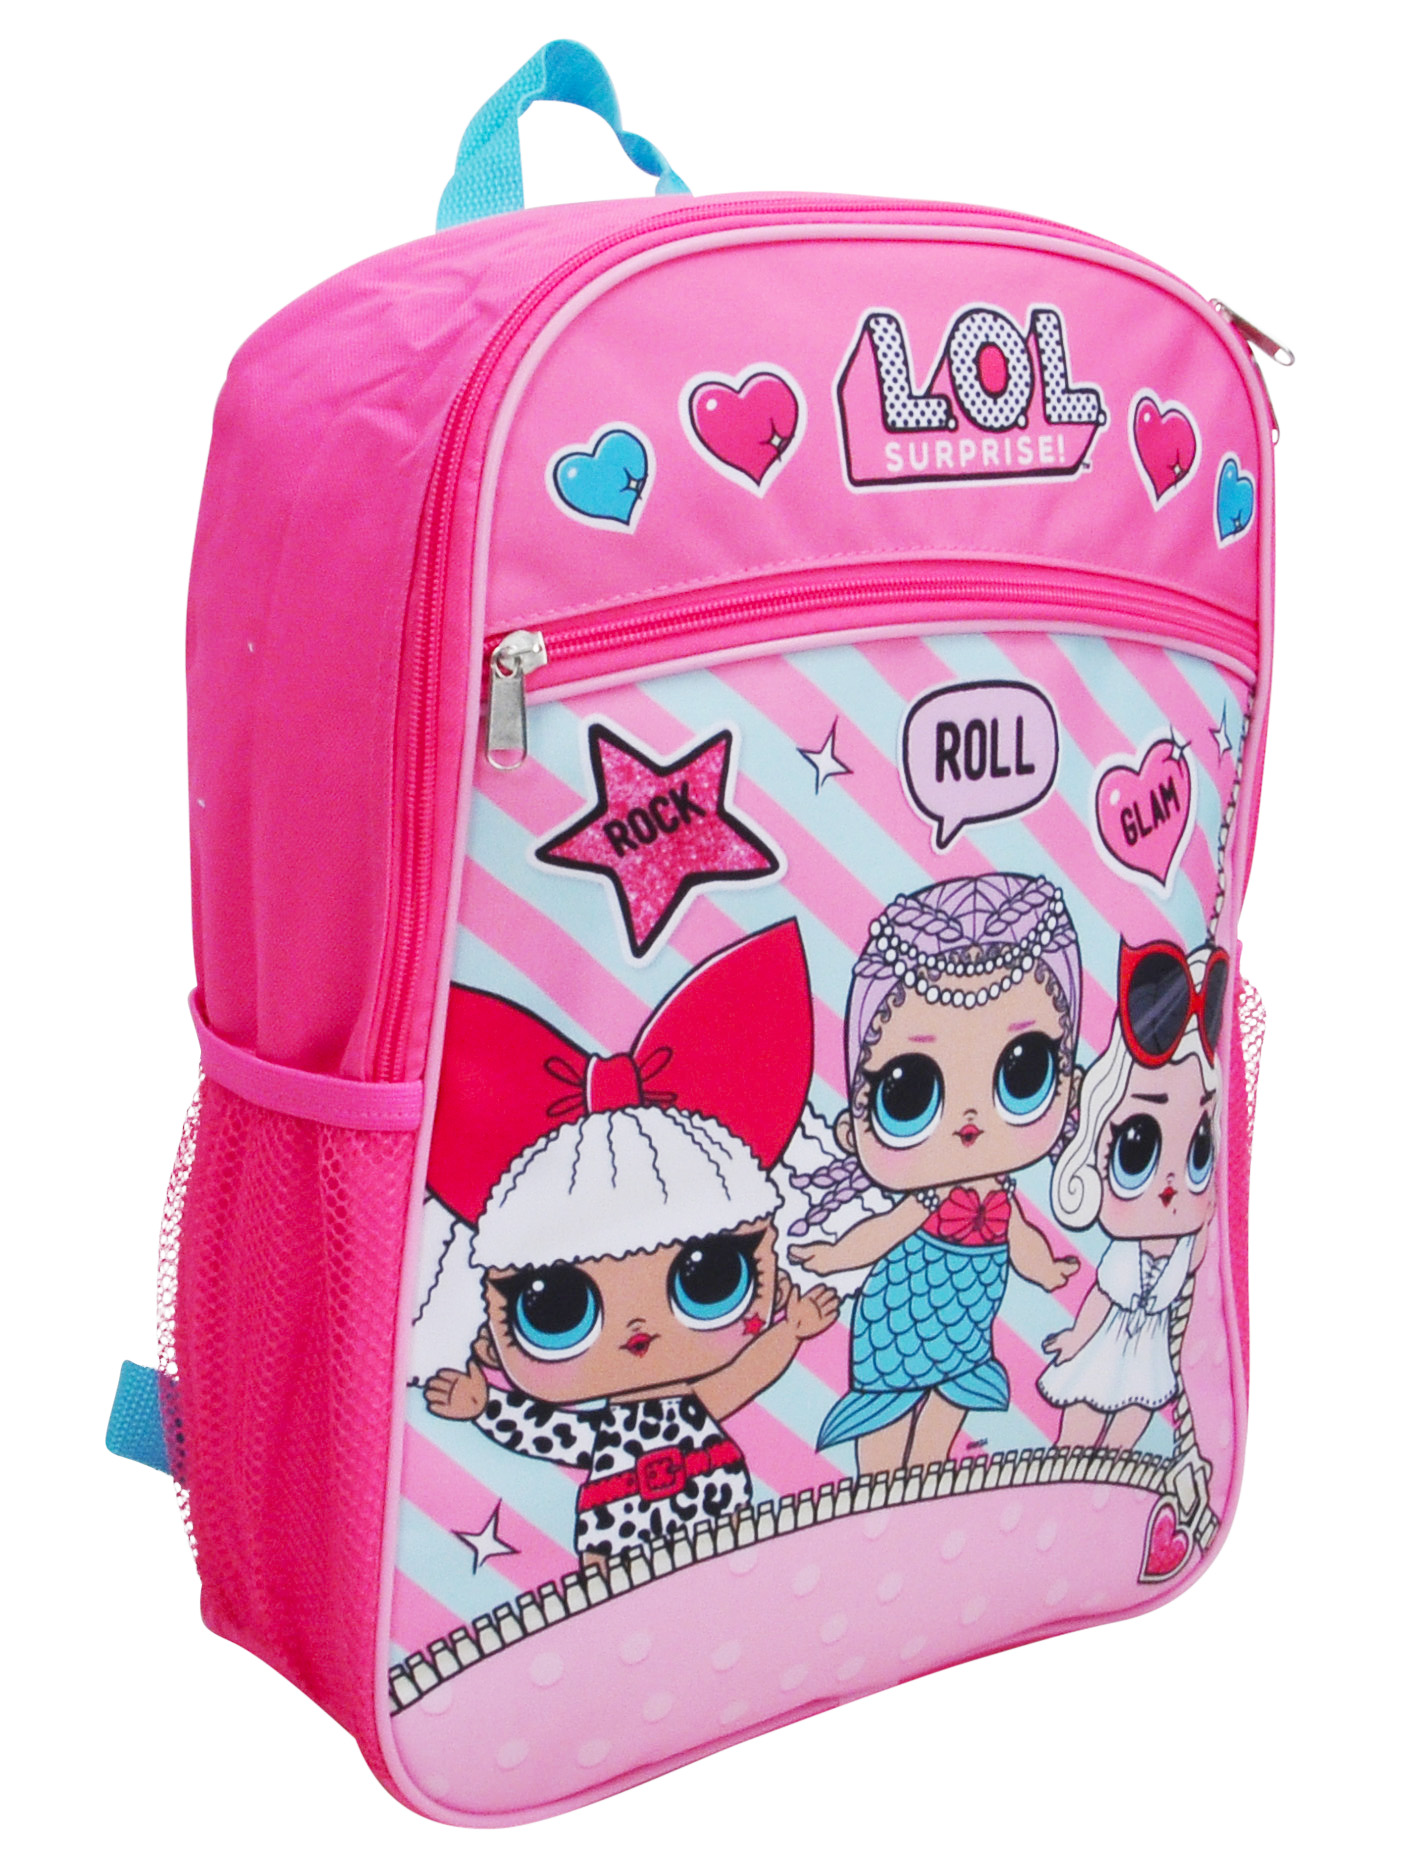 Featuring: Diva Merbaby /& Leading Baby Padded Shoulder Straps LOL Surprise Dolls Rock Roll Glam 16 Backpack with Extra Front Pocket